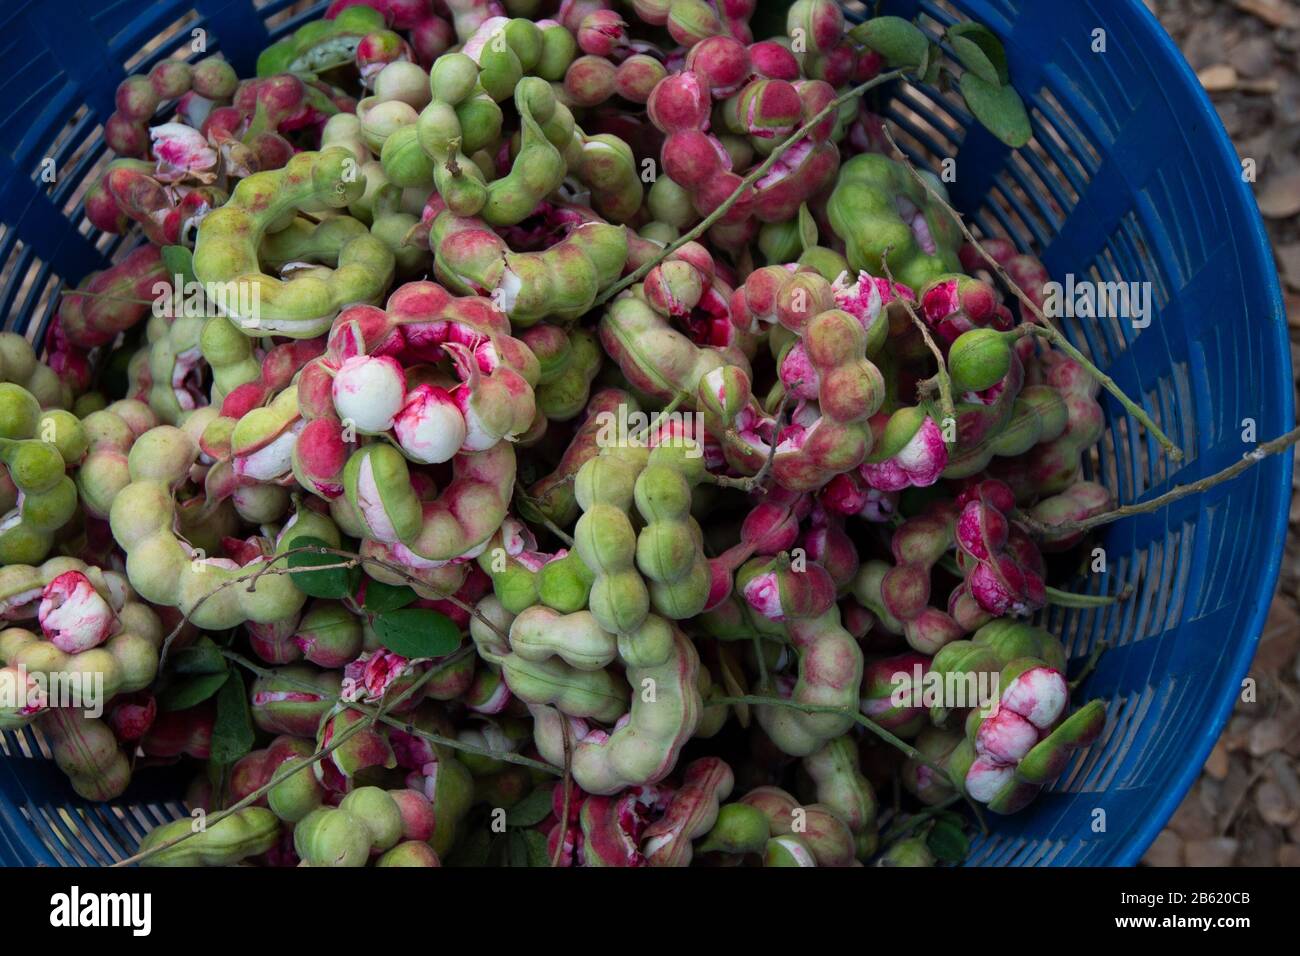 March 1, 2020, Ratchaburi, Thailand: A view of ripe harvested Pithecellobium dulce fruits..The harvest of the Pithecellobium dulce also known as Madras Thorn is from December to March. (Credit Image: © Vachira Kalong/SOPA Images via ZUMA Wire) Stock Photo